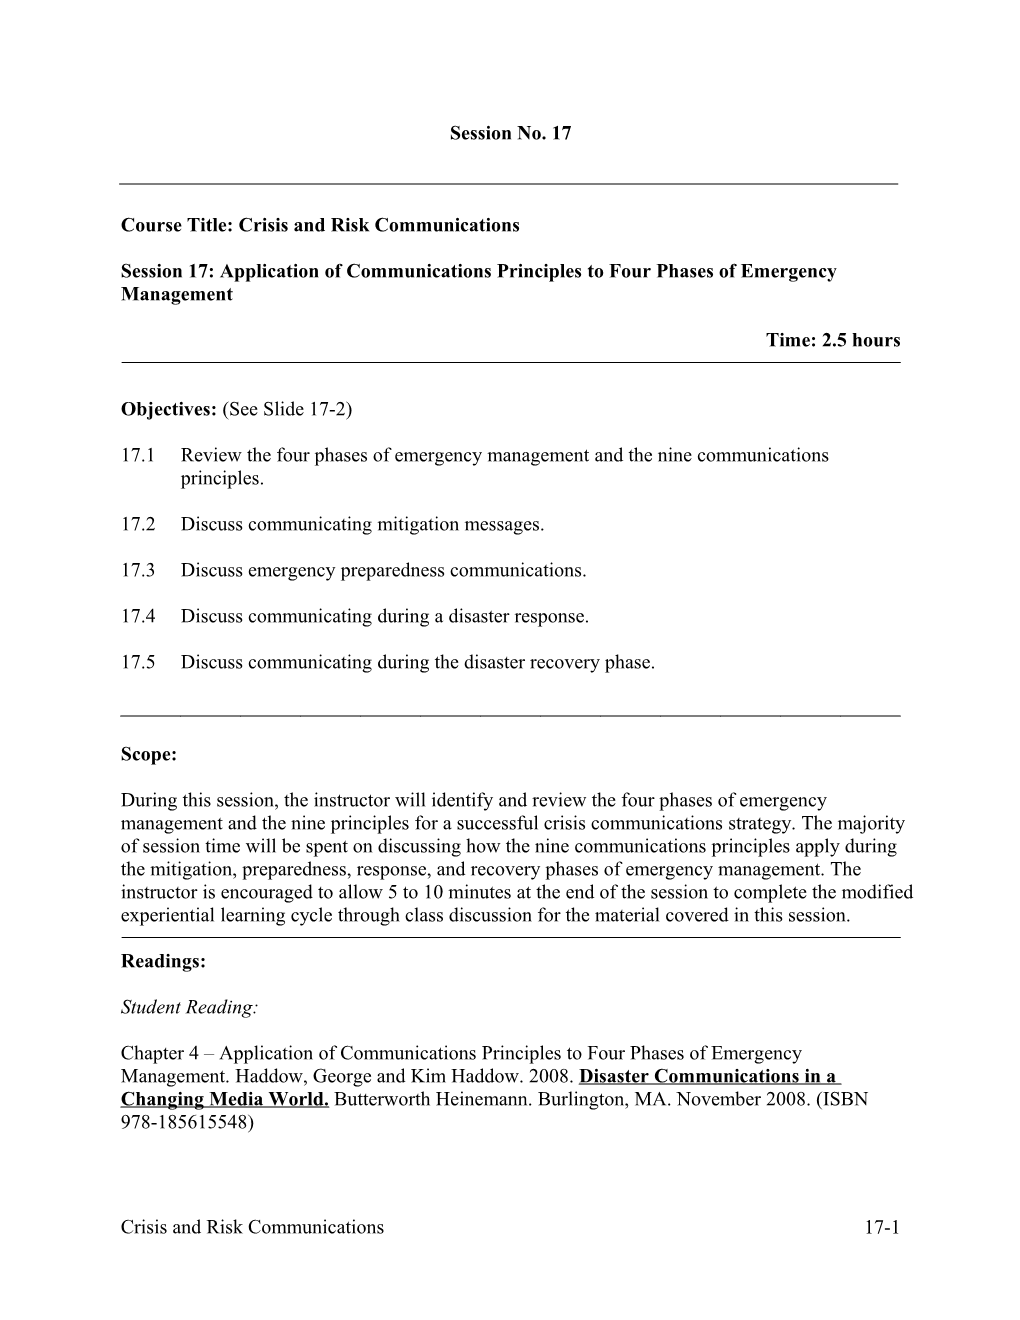 Course Title: Crisis and Risk Communications